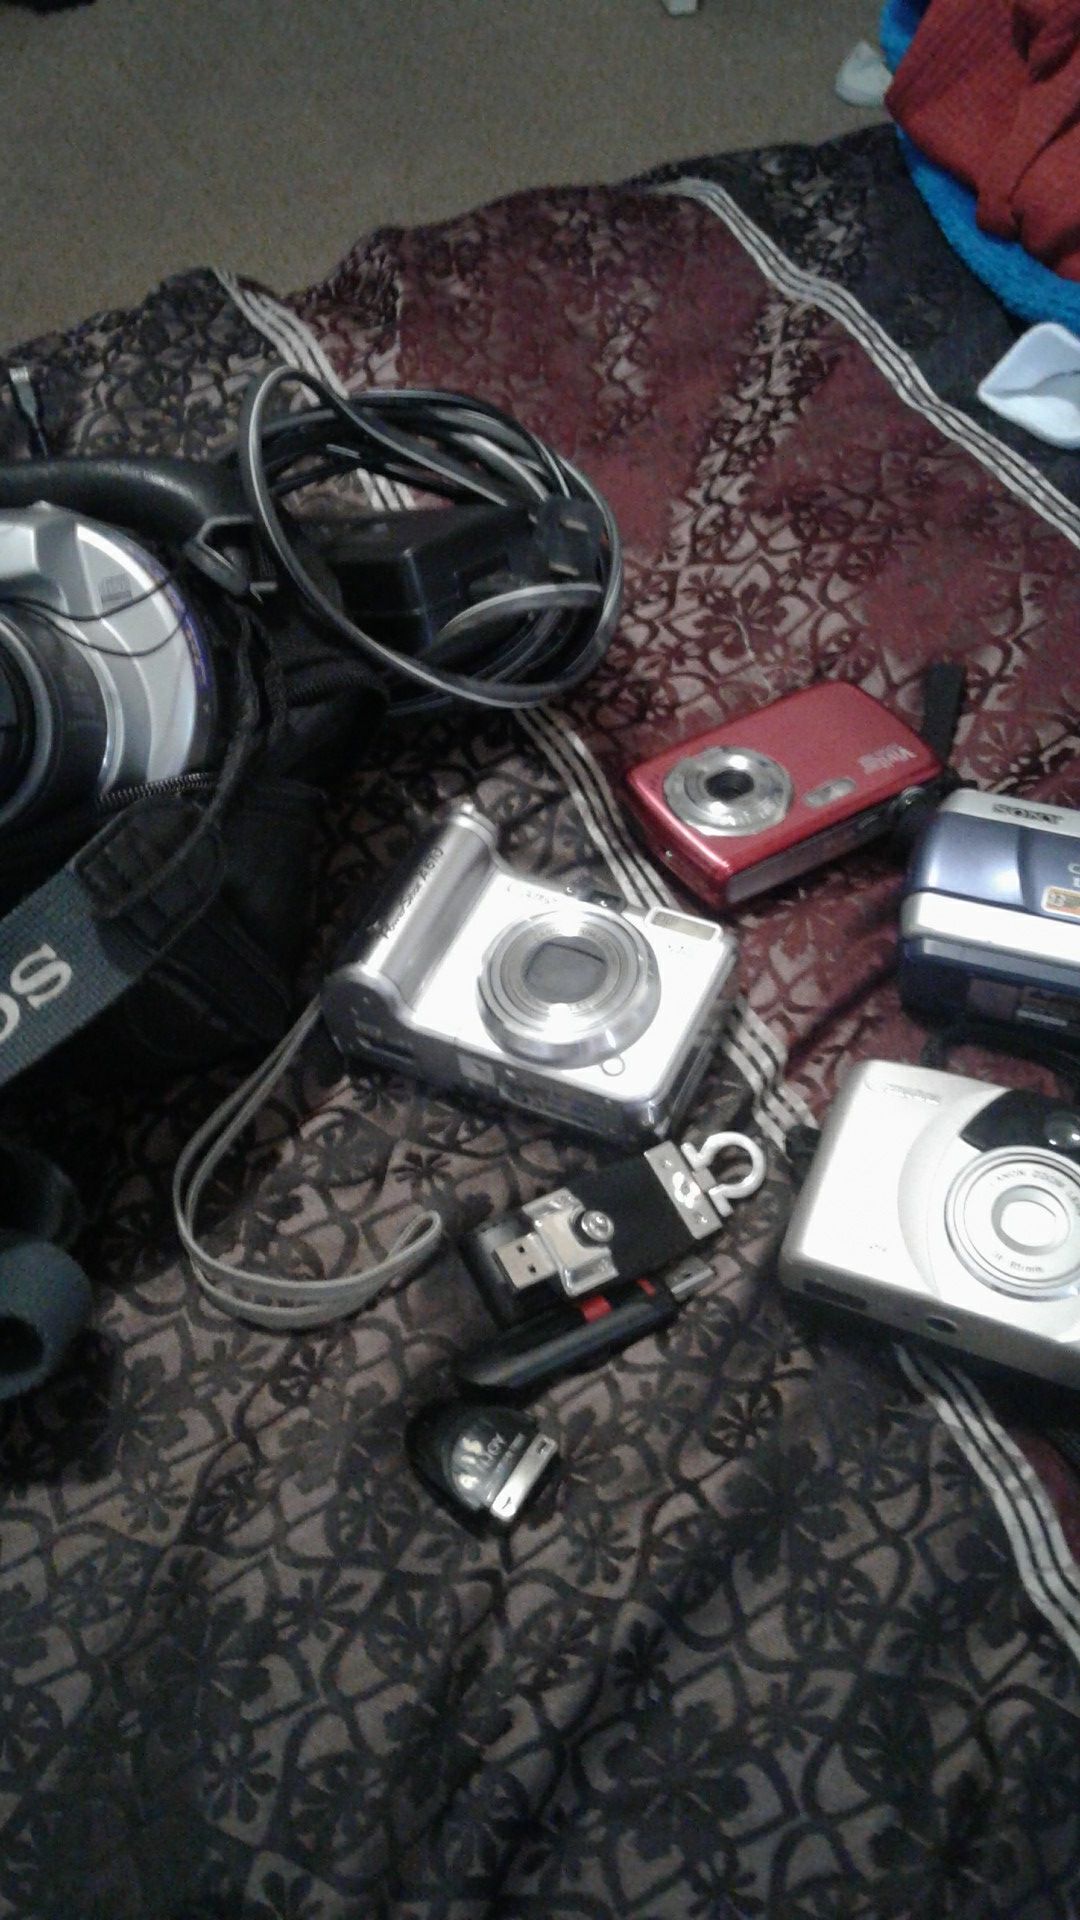 Multiple digital cameras and misc. Items